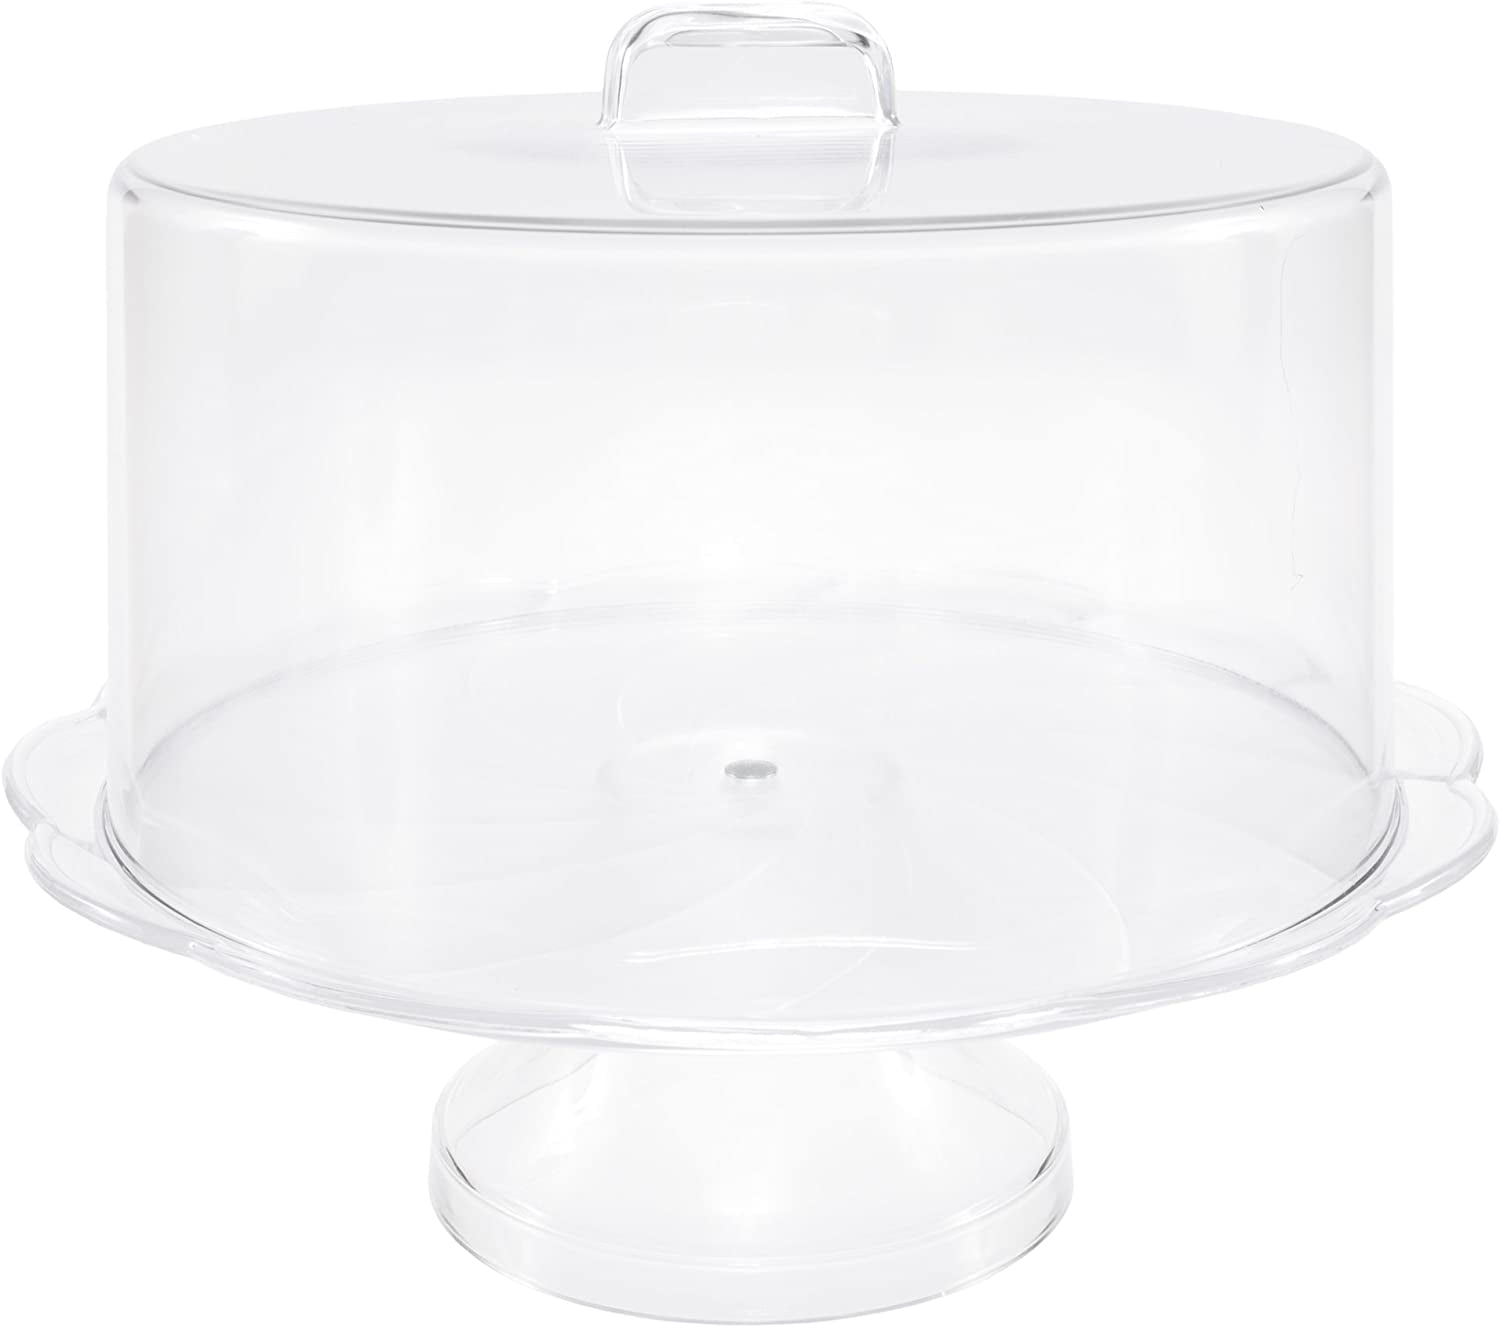 Break Resistant Plastic Cake Stand with Cover, Cake Plate